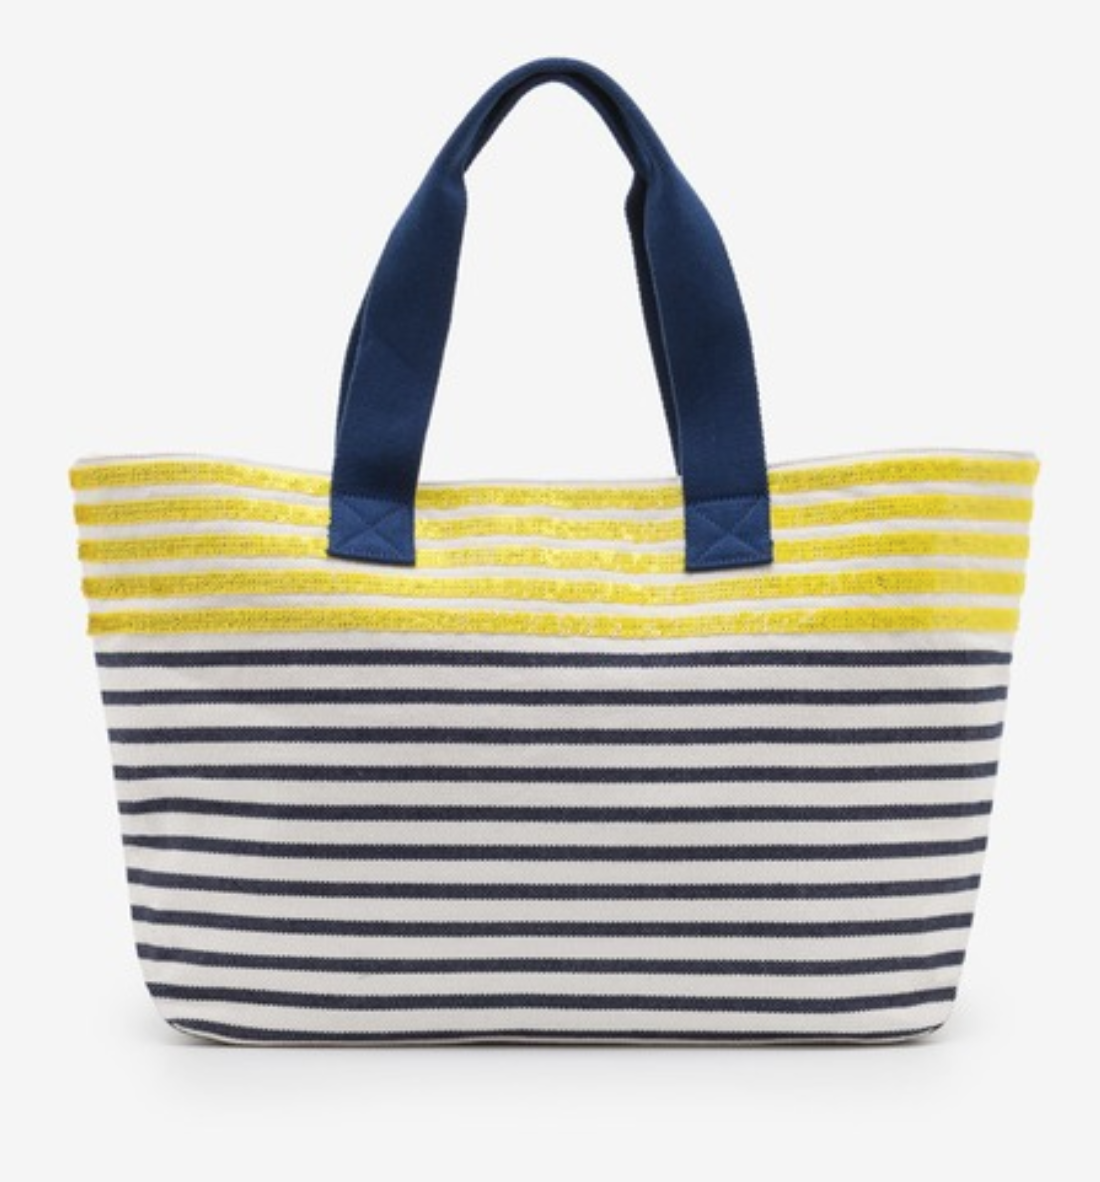 10 GORGEOUS BEACH BAGS FOR YOUR HOLIDAYS - Loved by Lizzi